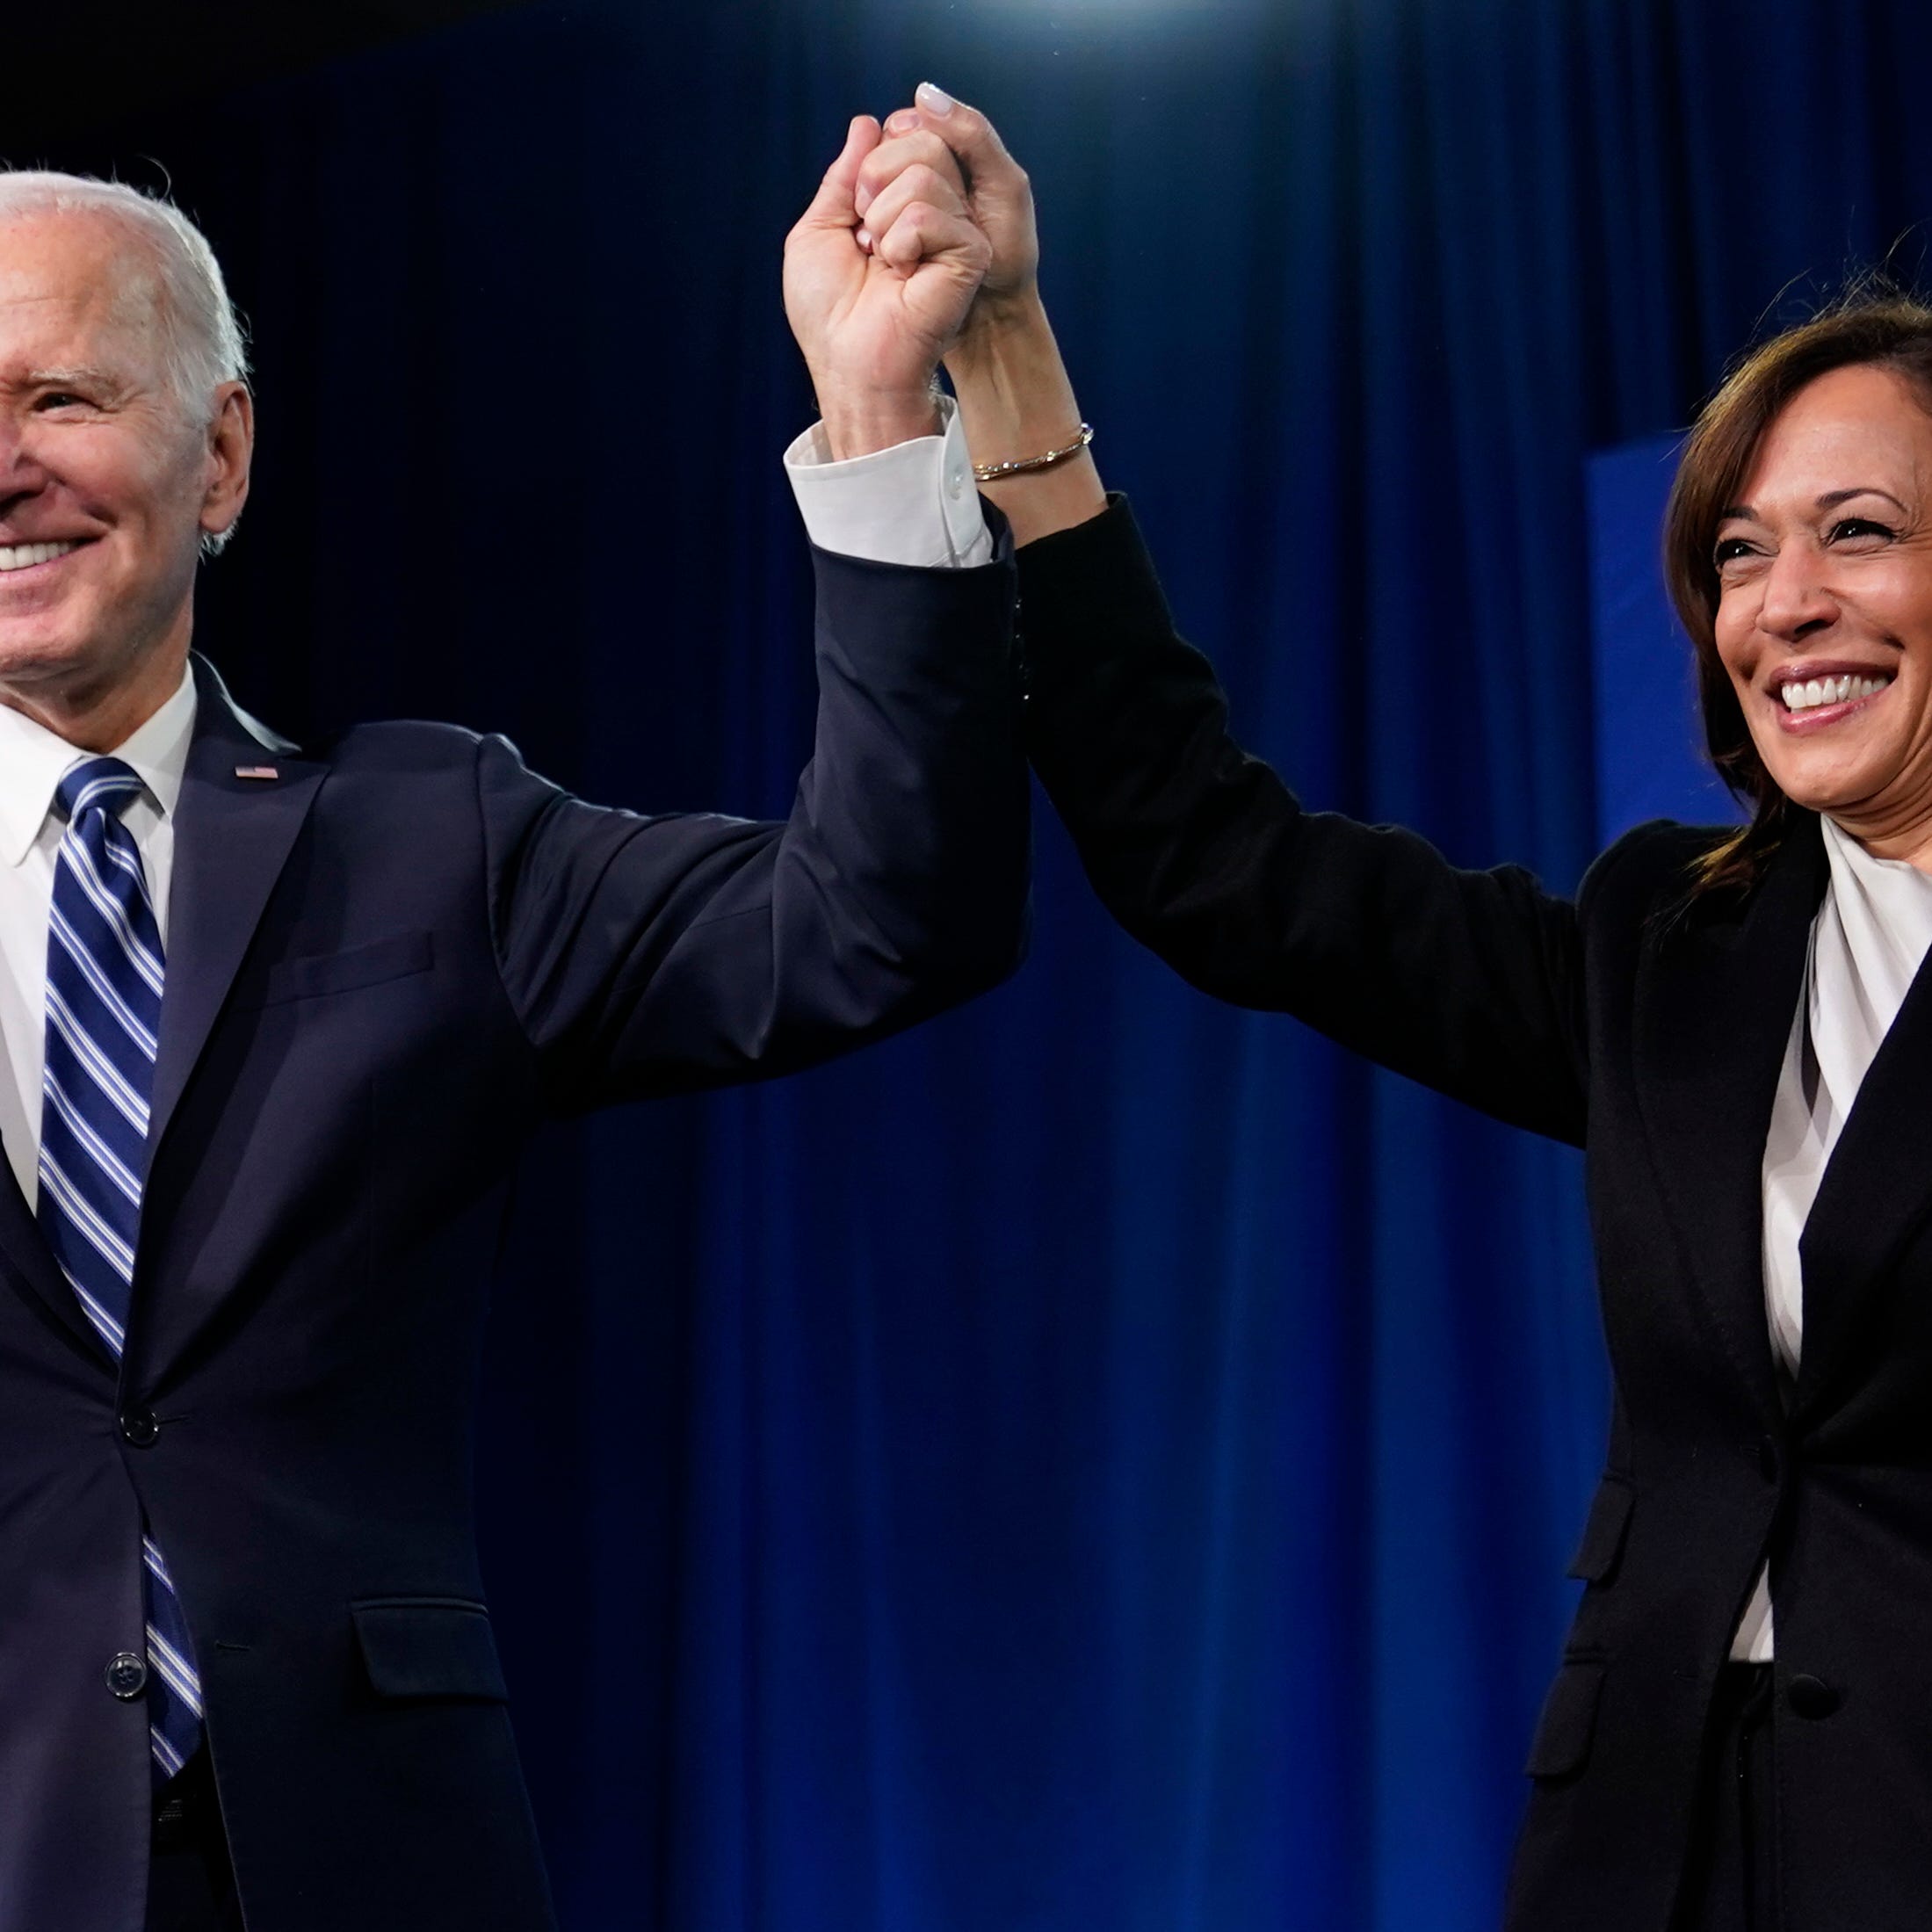 FILE - President Joe Biden and Vice President Kamala Harris stand on stage at the Democratic National Committee winter meeting, Feb. 3, 2023, in Philadelphia. Harris is poised to play a critical role in next year's election as President Joe Biden seeks a second term. (AP Photo/Patrick Semansky, File) ORG XMIT: WX401